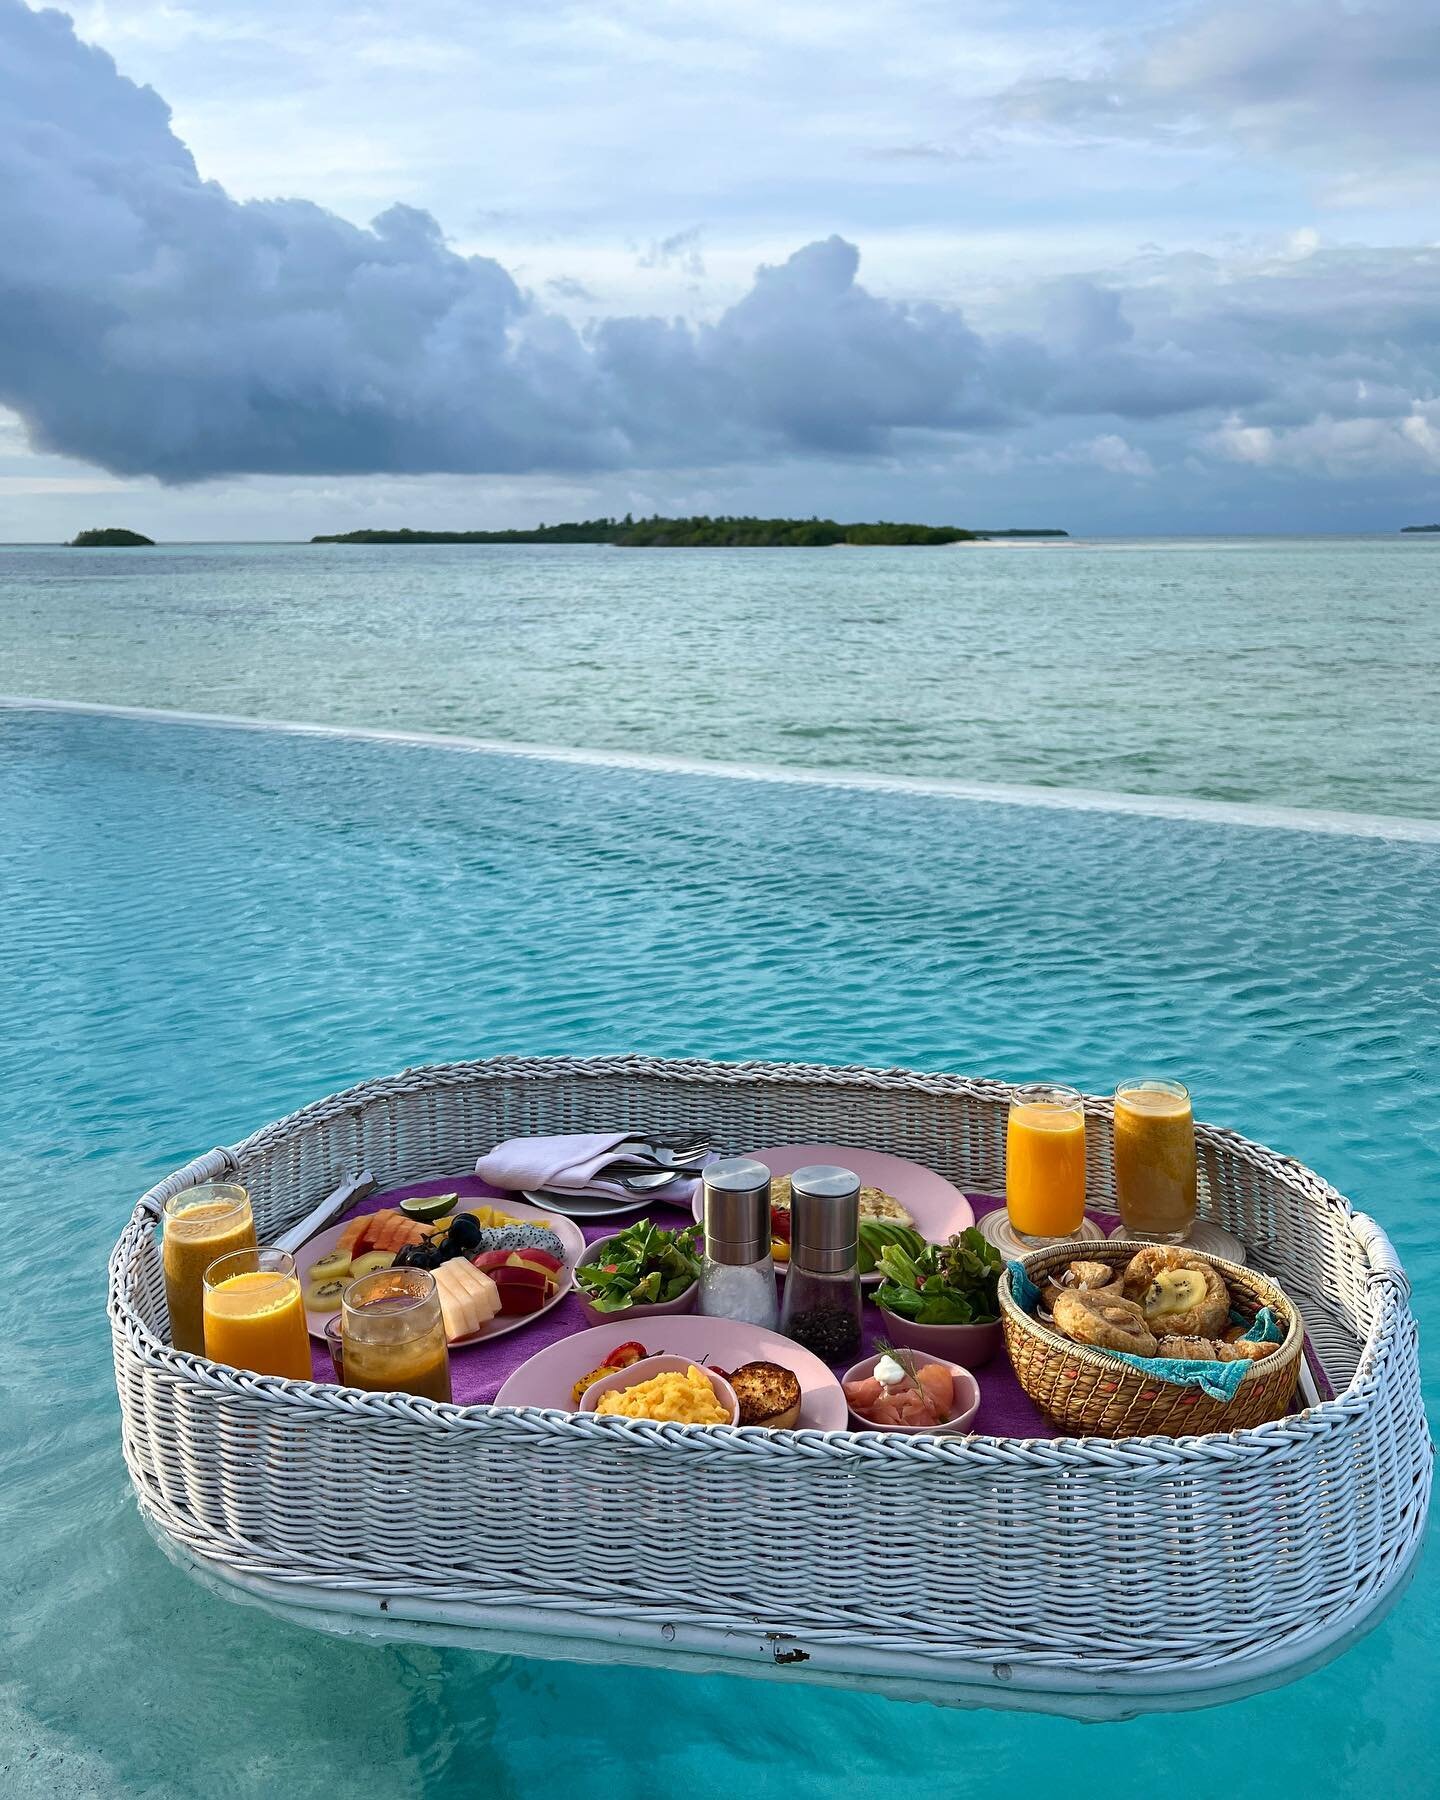 Thank you @discoversoneva for an amazing trip to the Maldives! After swimming with manta rays, making souvenirs in the glassblowing studio, eating the best seafood, and enjoying the spa, the sunrise floating breakfast in our stunning overwater villa 